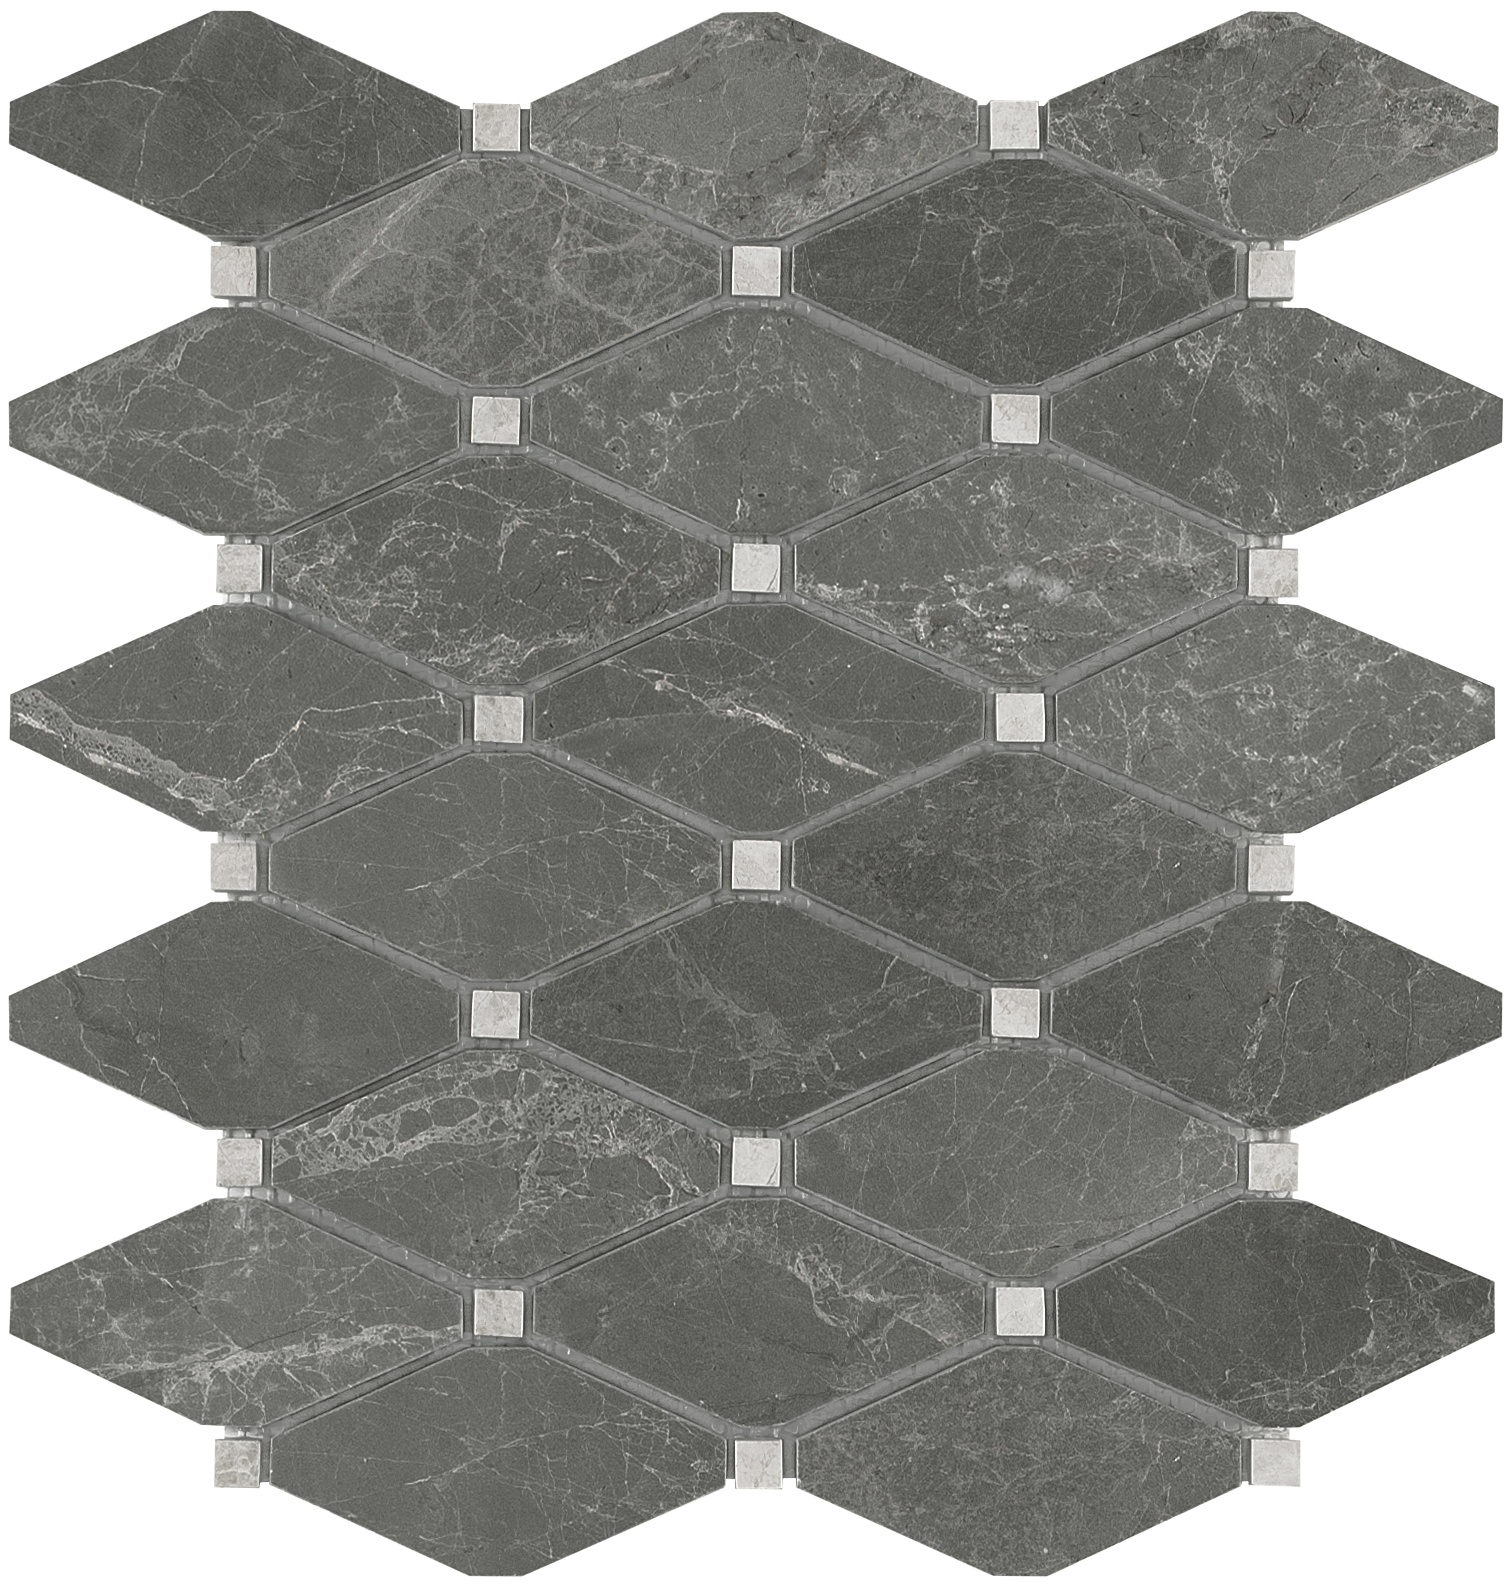 marble clipped diamond pattern natural stone mosaic from stark carbon anatolia collection distributed by surface group international polished finish straight edge edge mesh shape